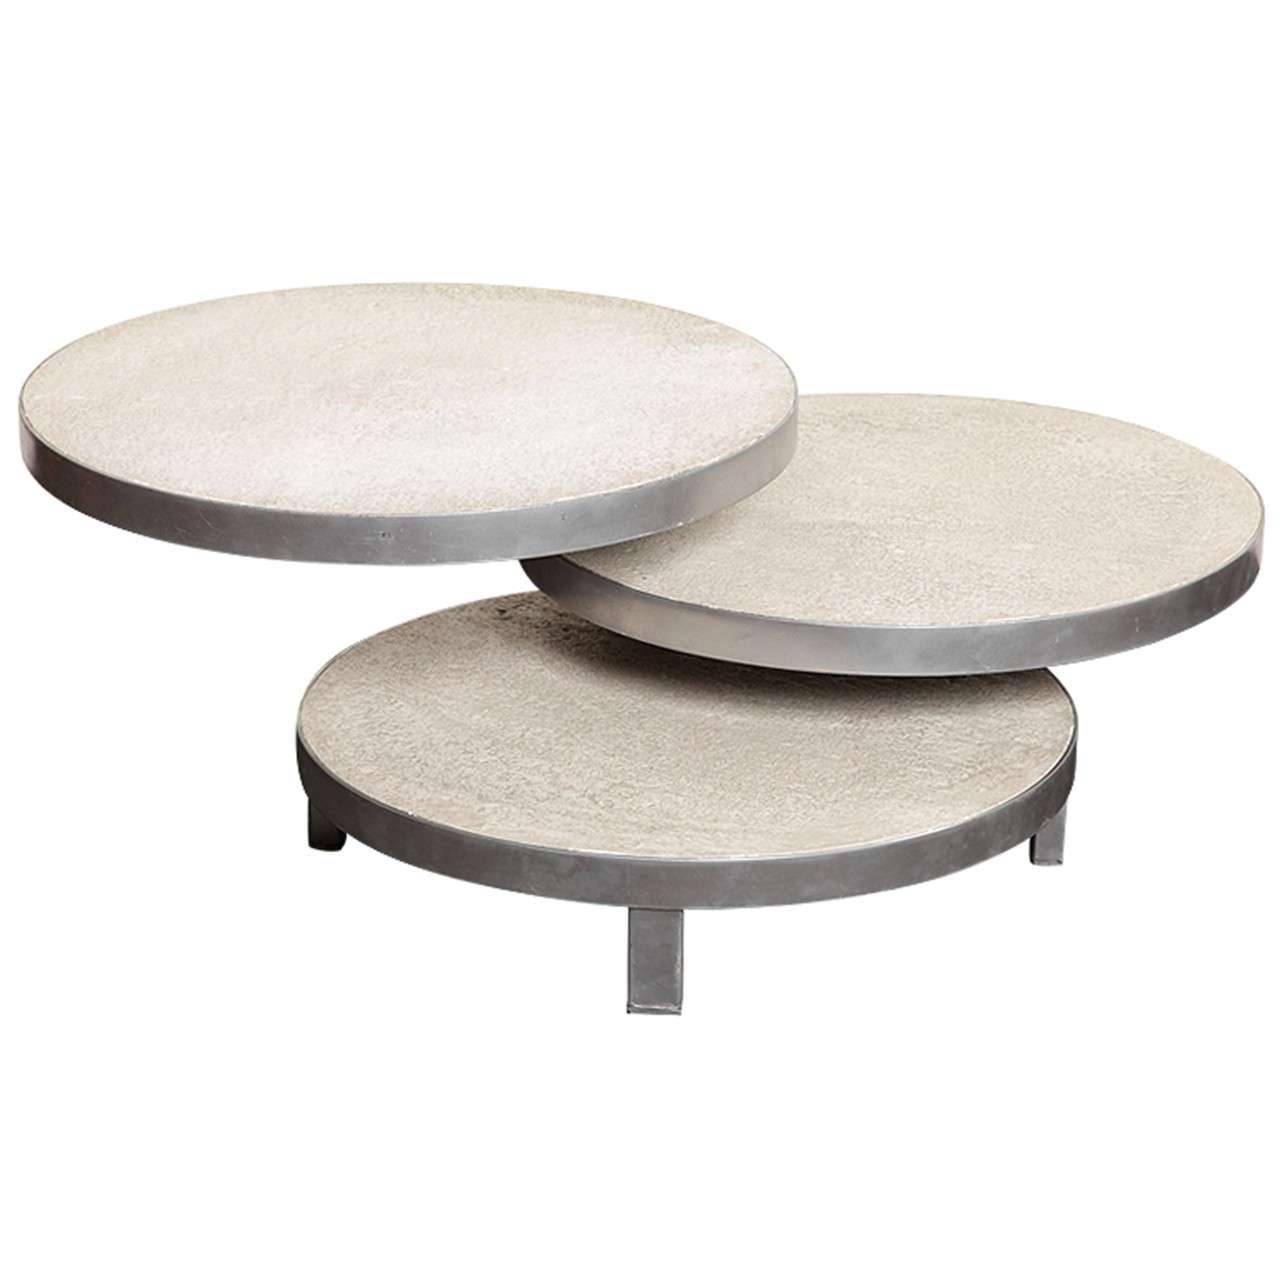 Triple Tiered Coffee Table